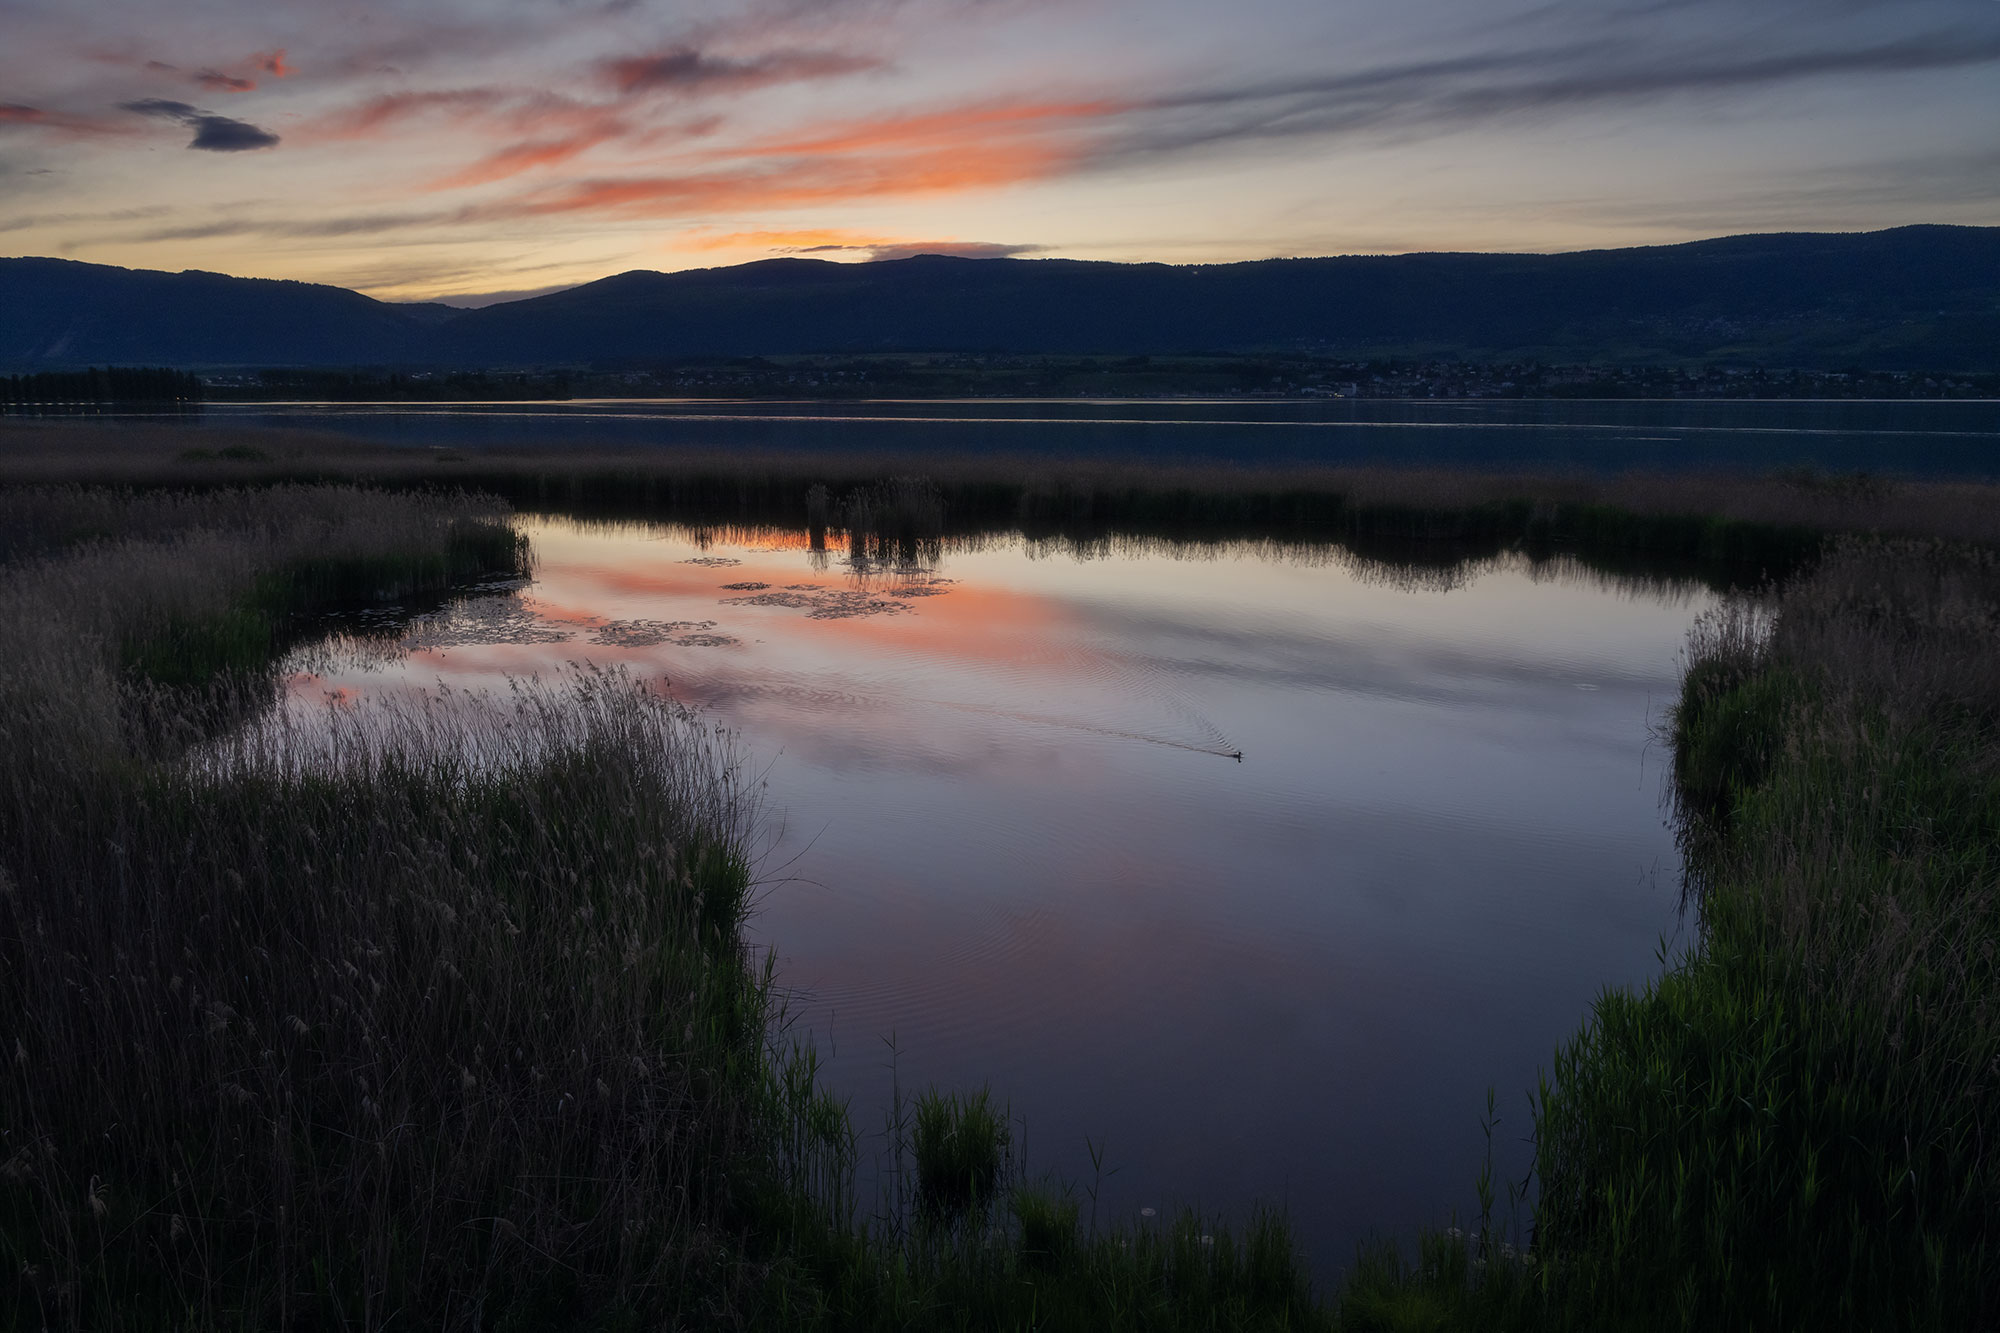 Landscape photography capturing a sunset at the Grande Cariçaie nature reserve in Lake Neuchâtel, Switzerland. Photo taken with the Nikon Z8.